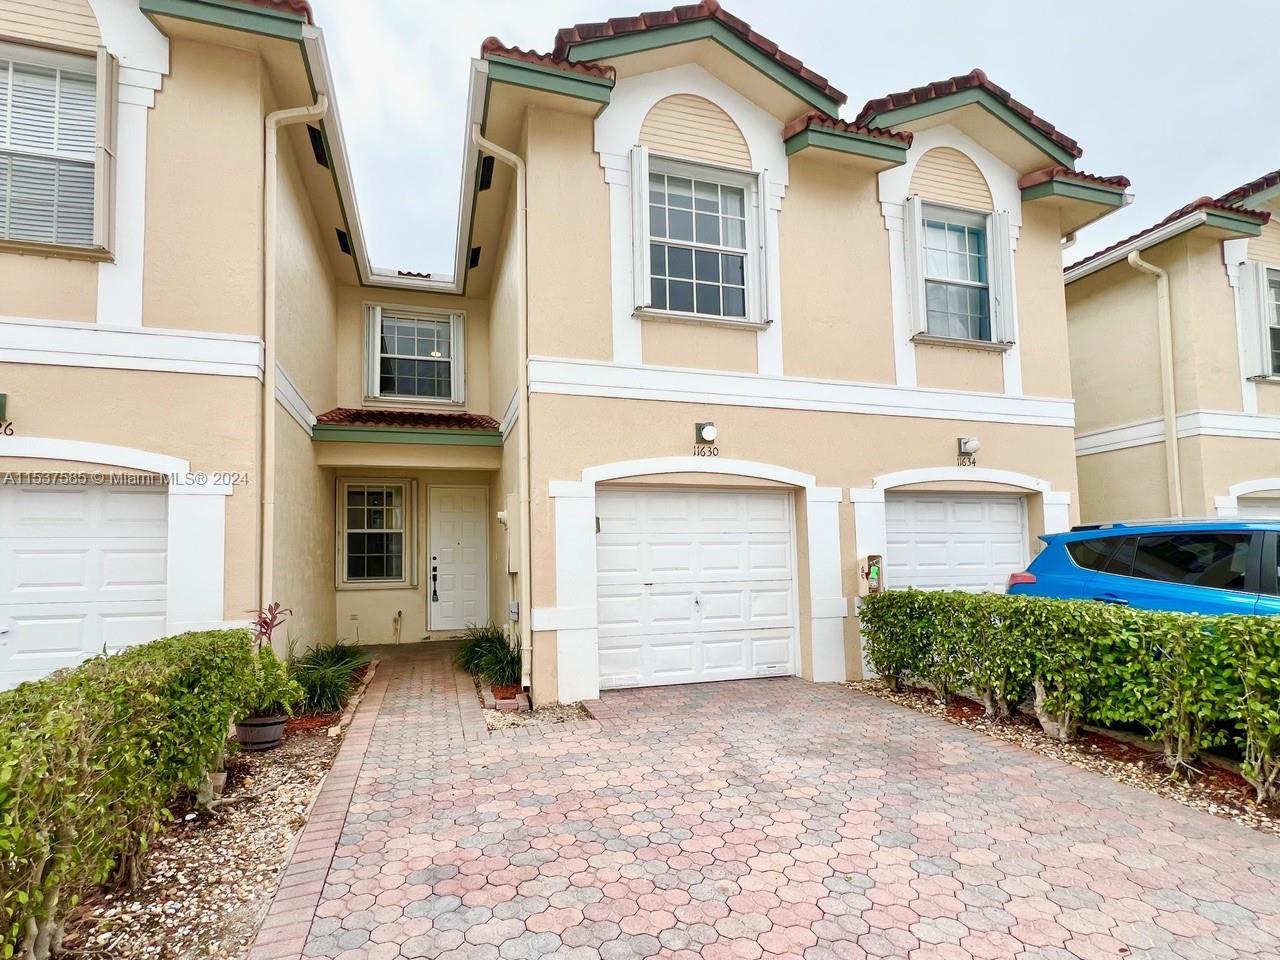 Photo of 11630 NW 47th Dr #11630 in Coral Springs, FL